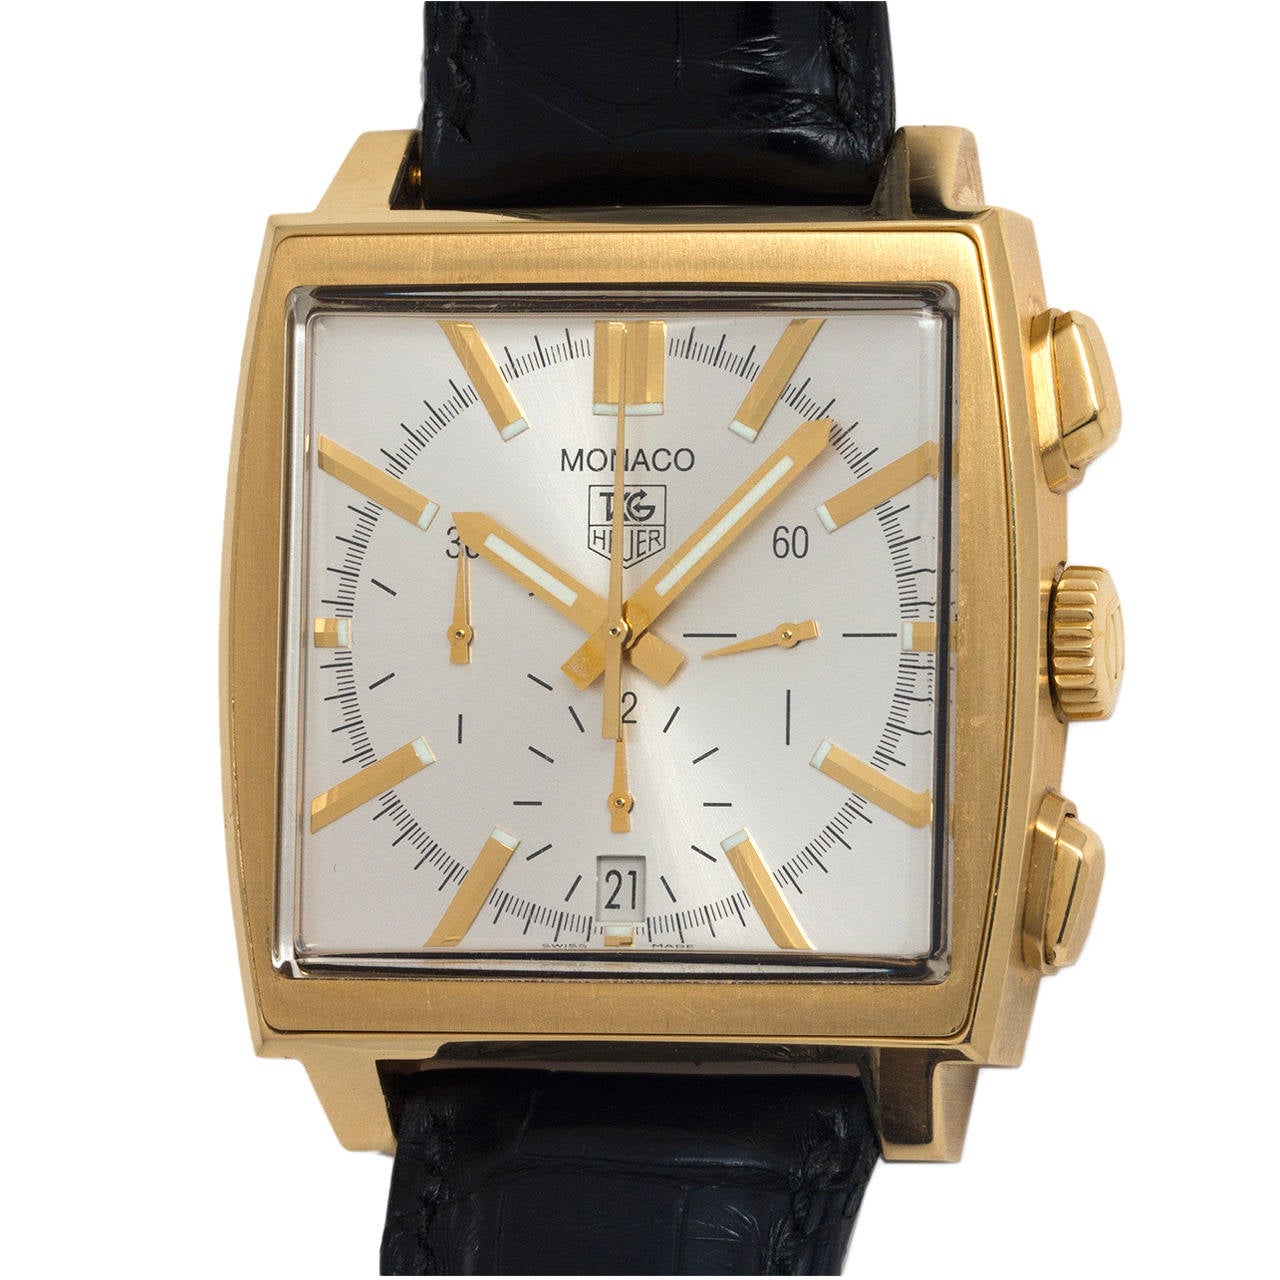 18k Gold Tag Heuer Watch - 8 For Sale on 1stDibs